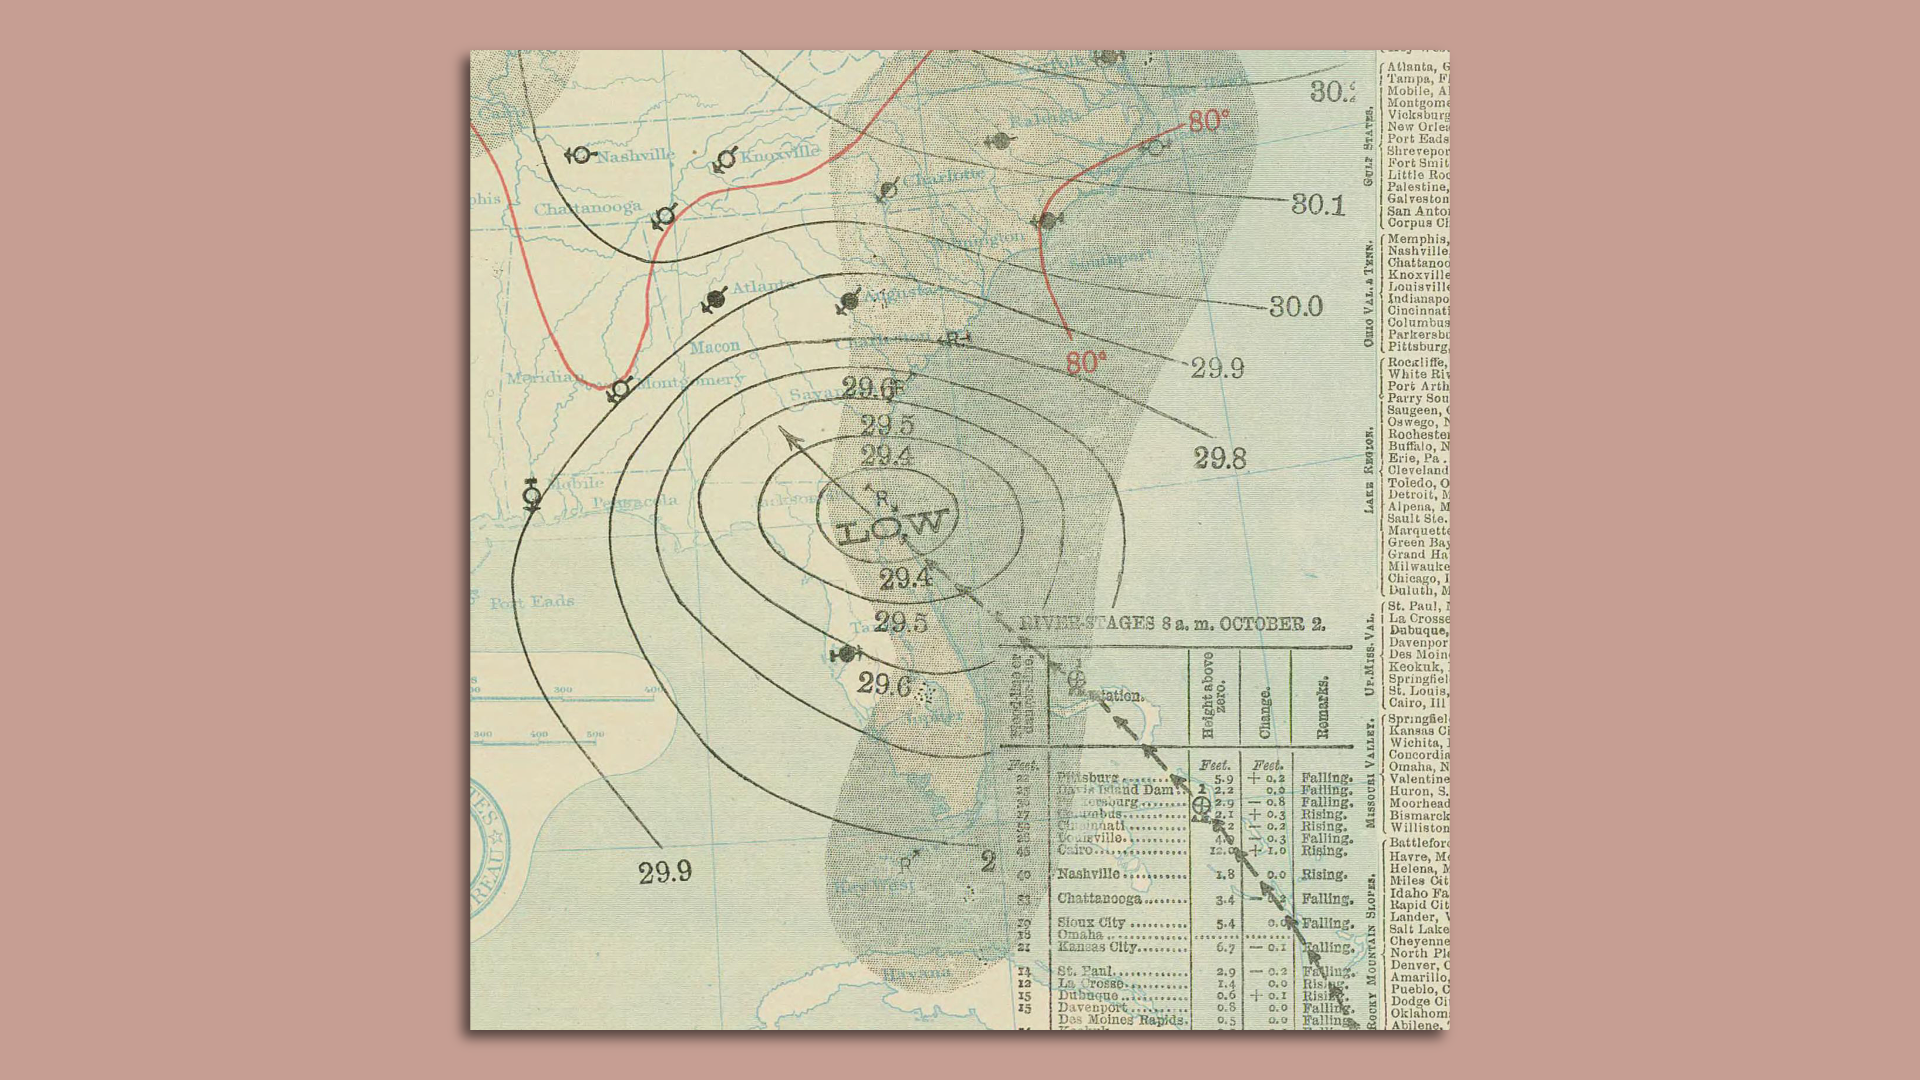 An old map showing the extent of the 1898 hurricane that hit the Georgia coast